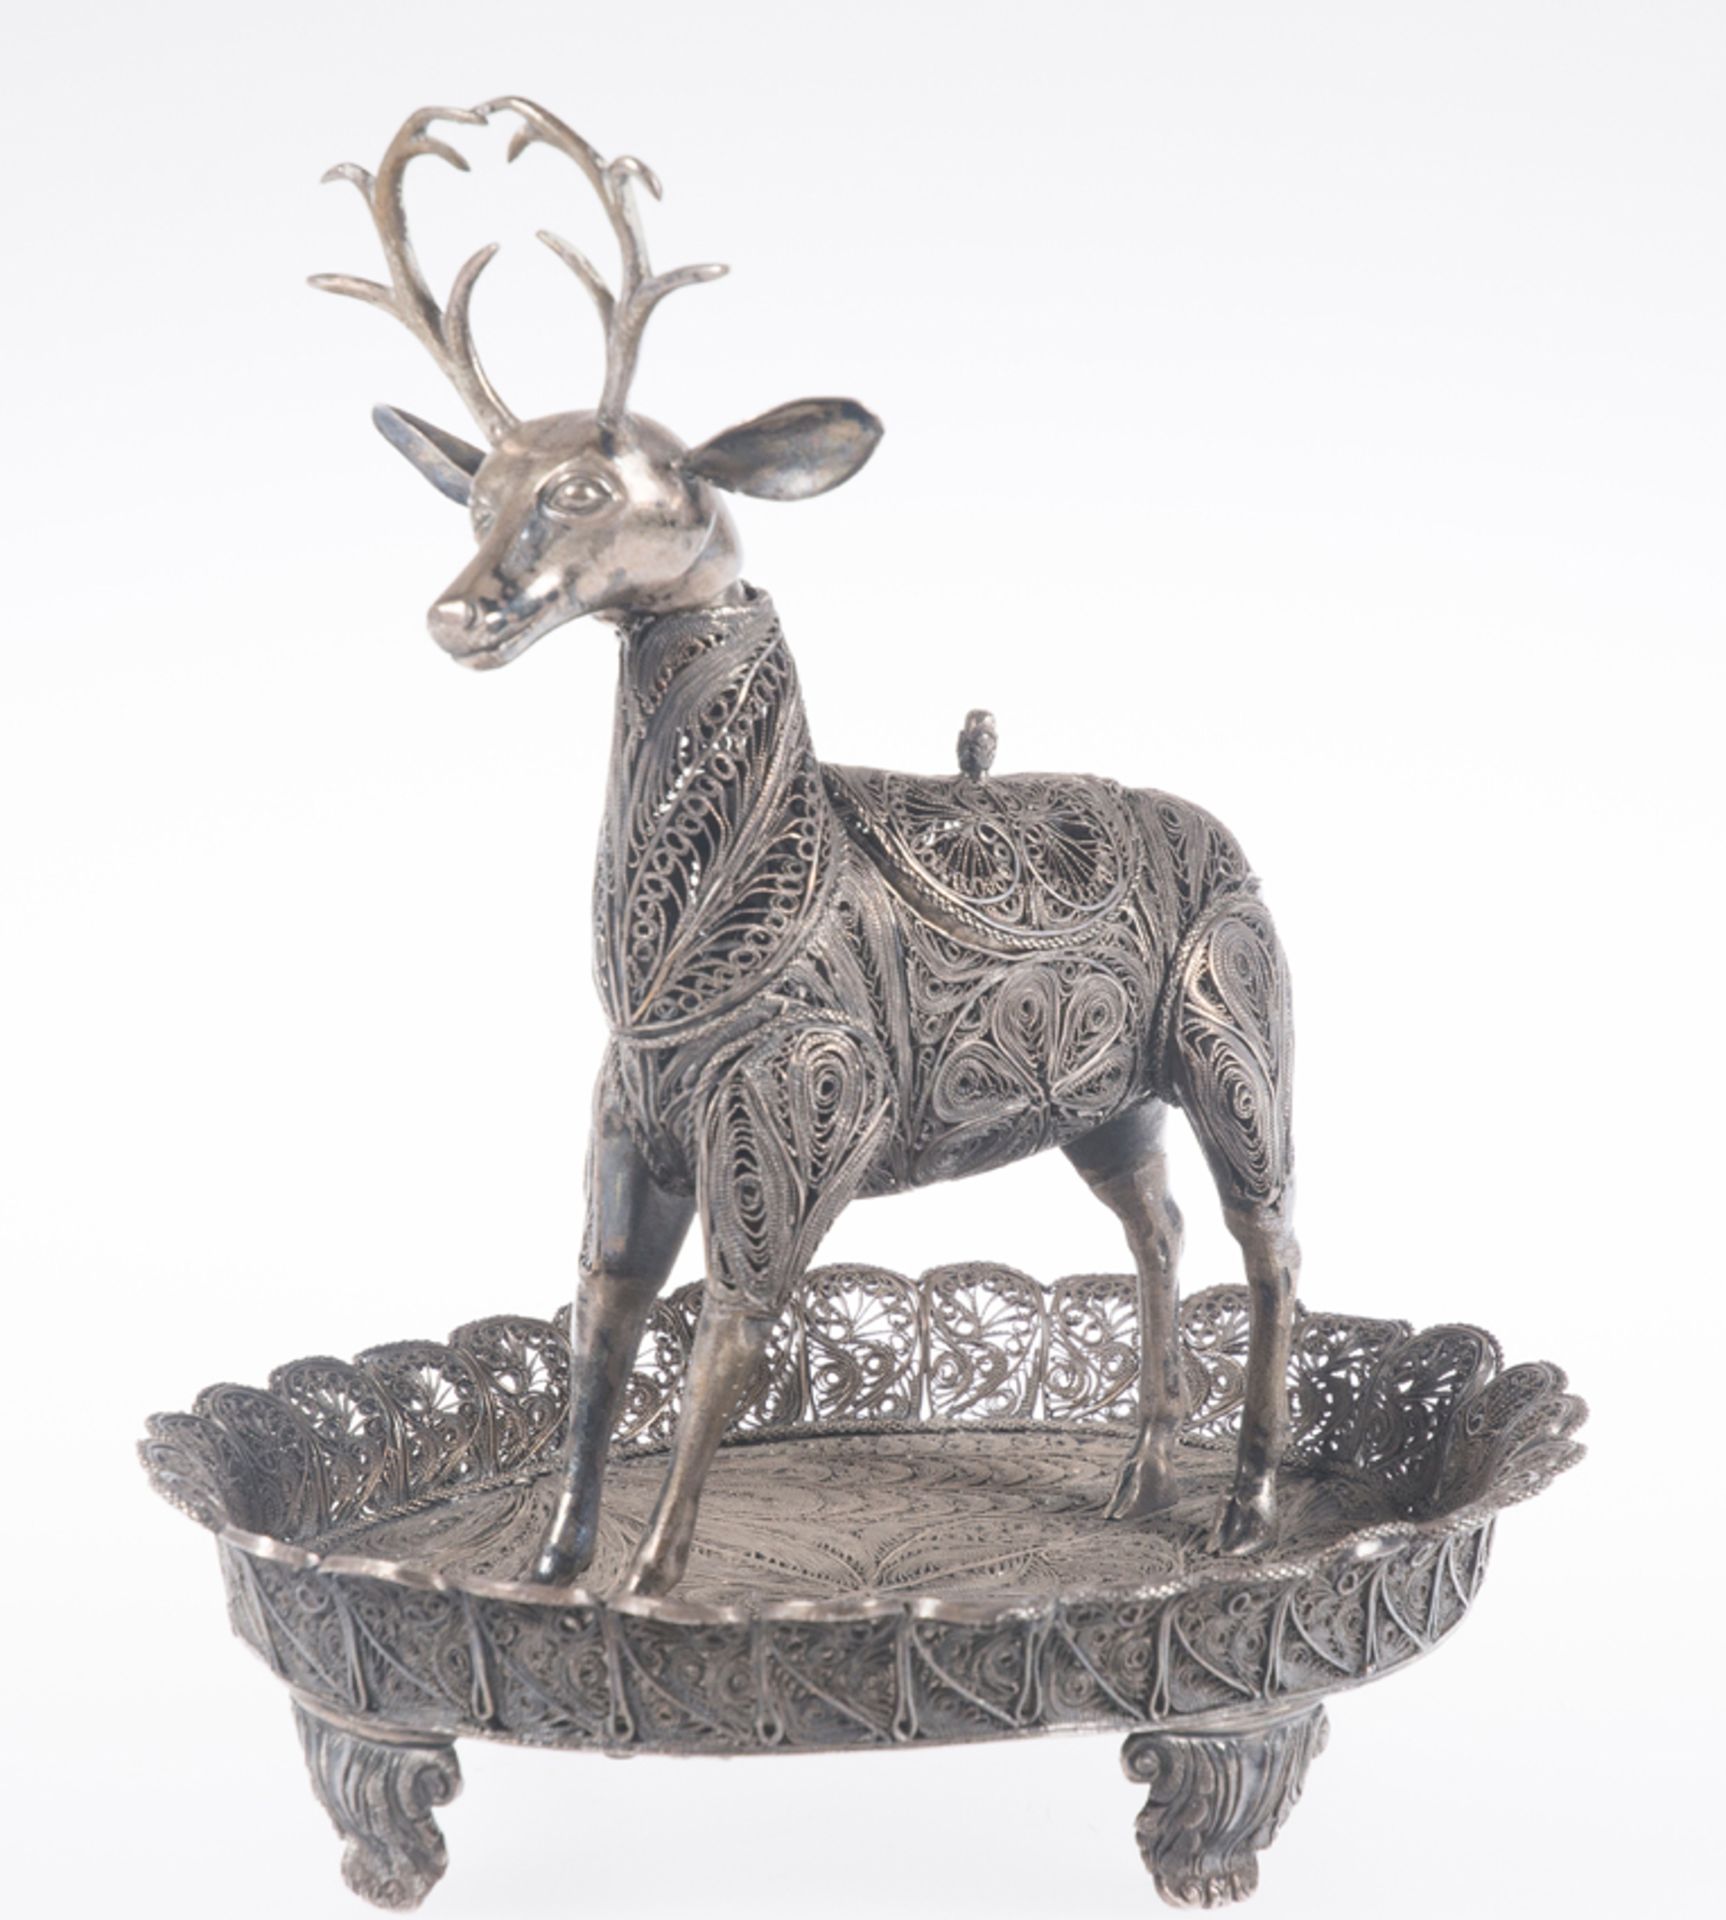 "Sahumador". Deer-shaped, silver filigree incense burner in chased and embossed cast silver. Colonia - Bild 7 aus 10